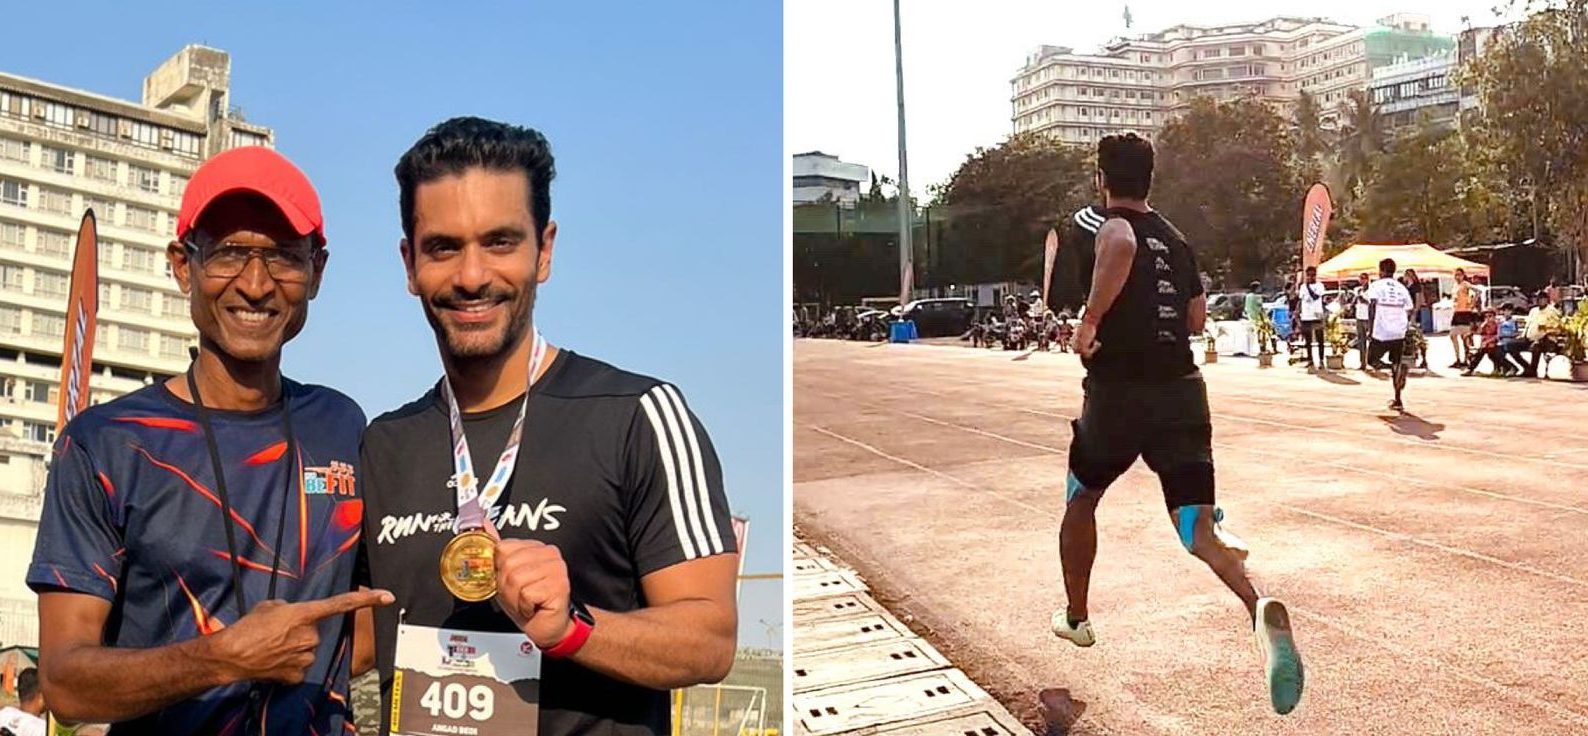 Angad Bedi wins silver in his debut Sprinting tournament!